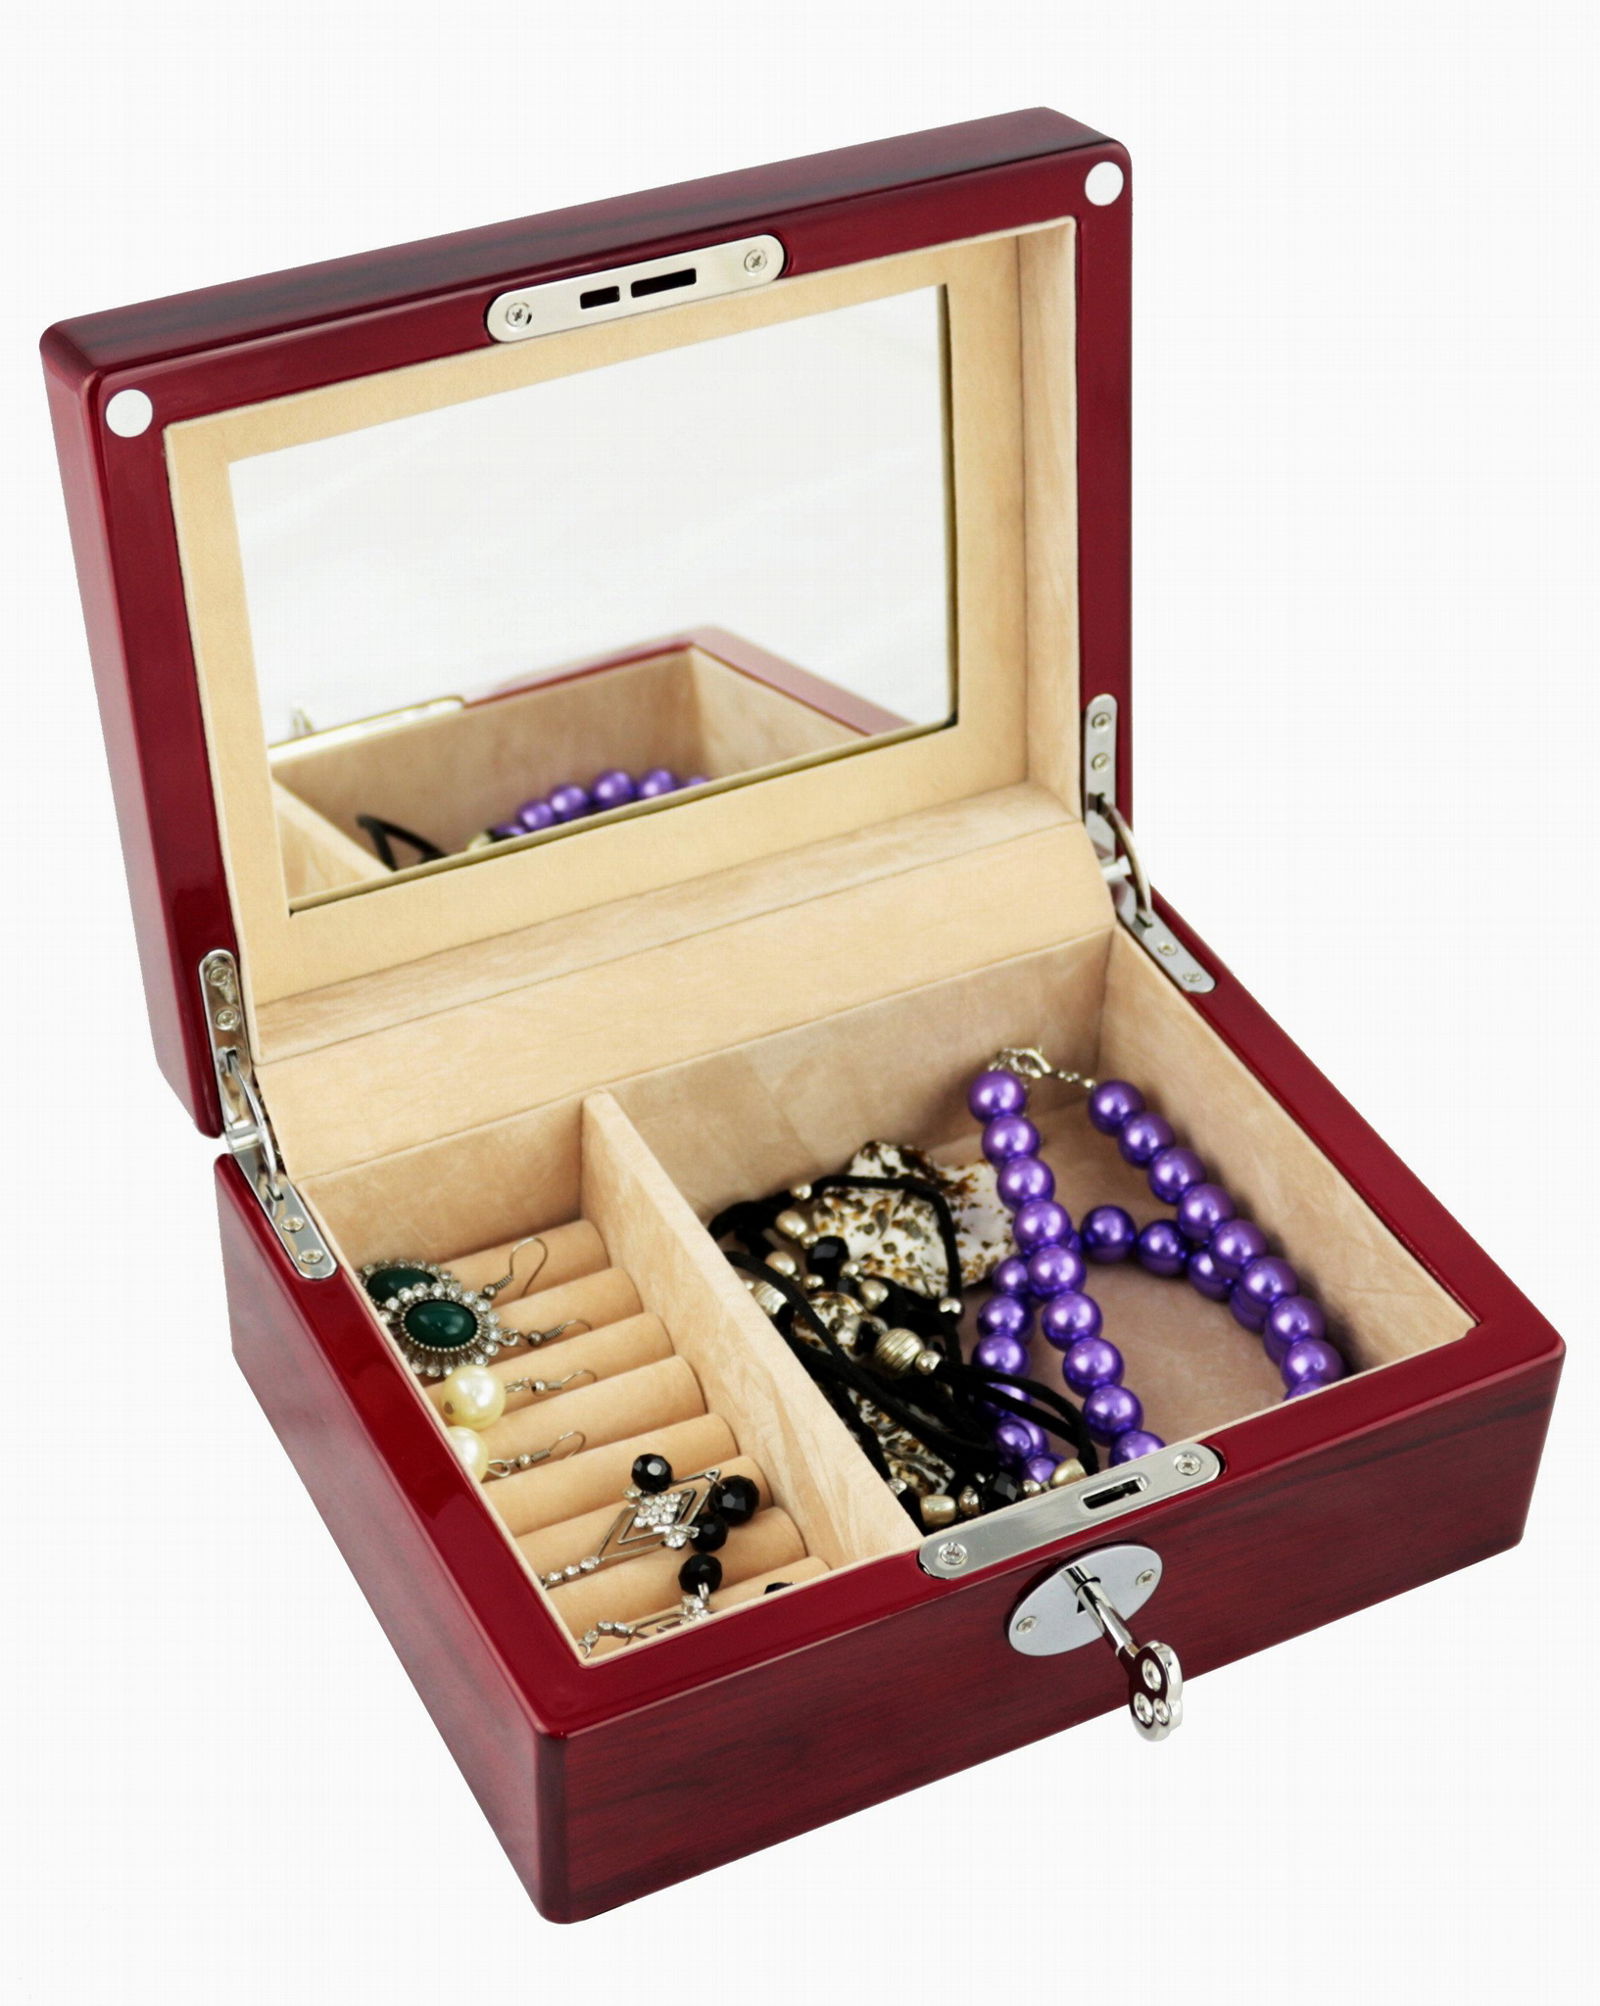 Rosewood high gloss finish wooden jewelry gift box 4